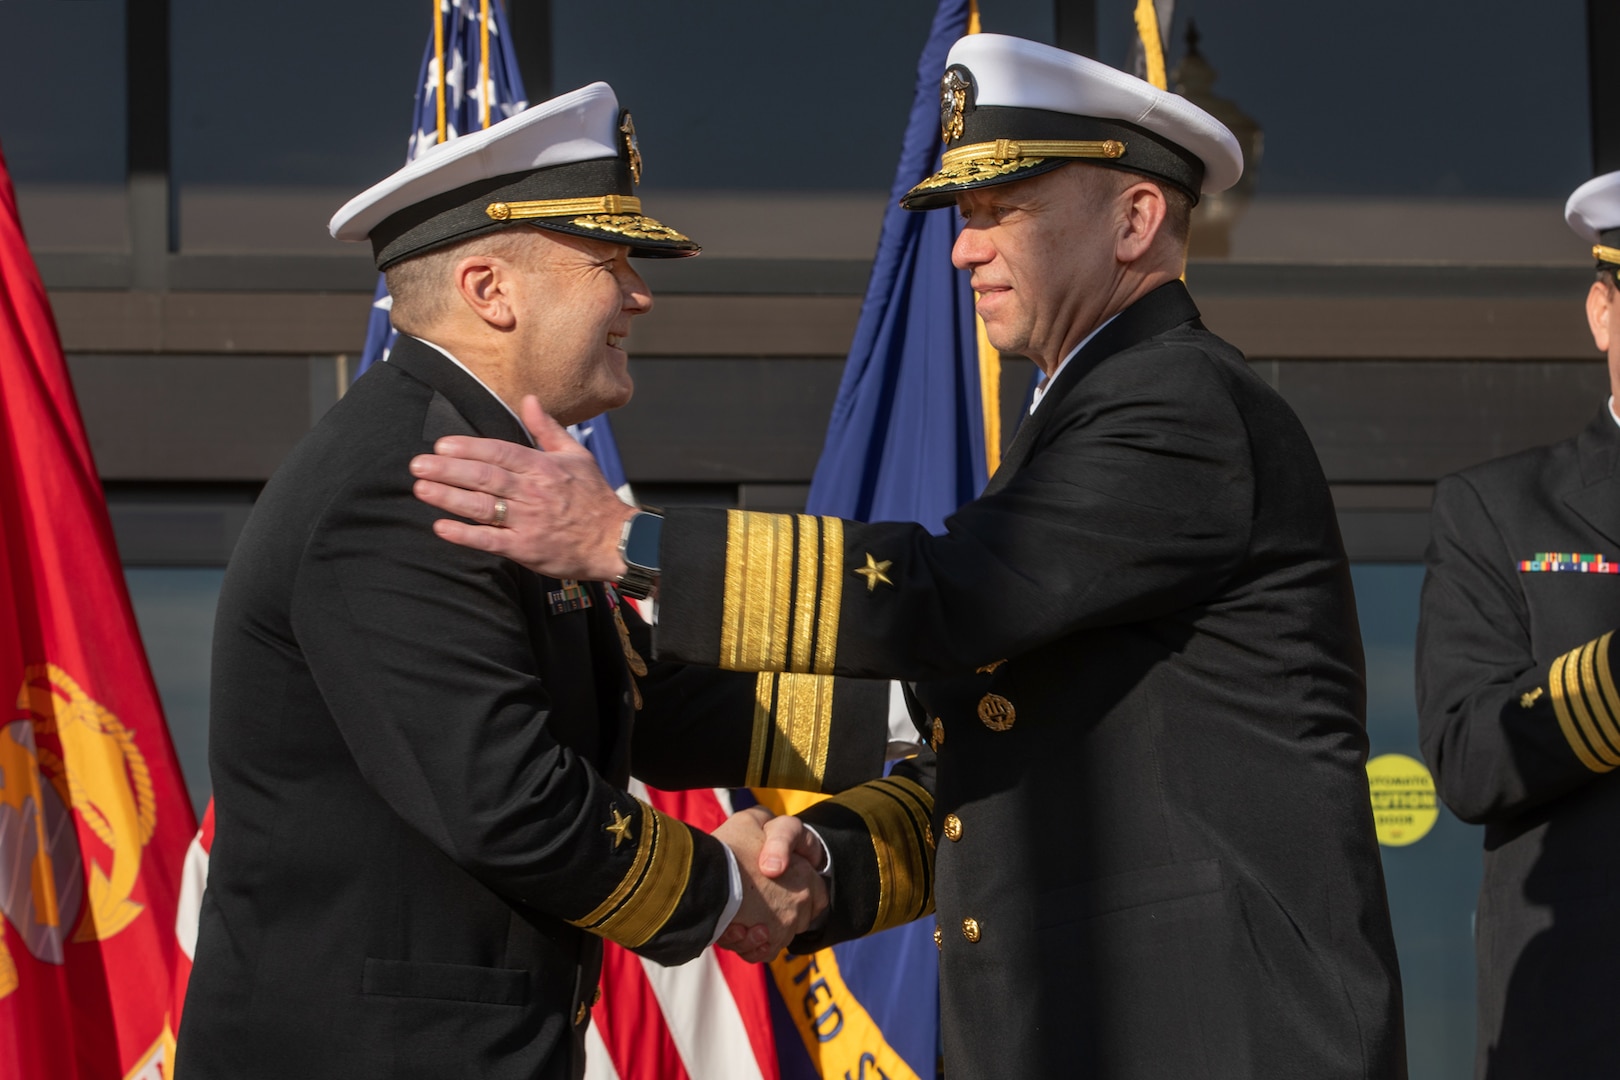 Vice Adm. James Downey assumed command from Rear Adm. Thomas  Anderson (L) during the Naval Sea Systems Command (NAVSEA) Change of Command ceremony which took place in Dahlgren Park at the Washington Navy Yard. (U.S. Navy photo by Laura Lakeway/RELEASED)